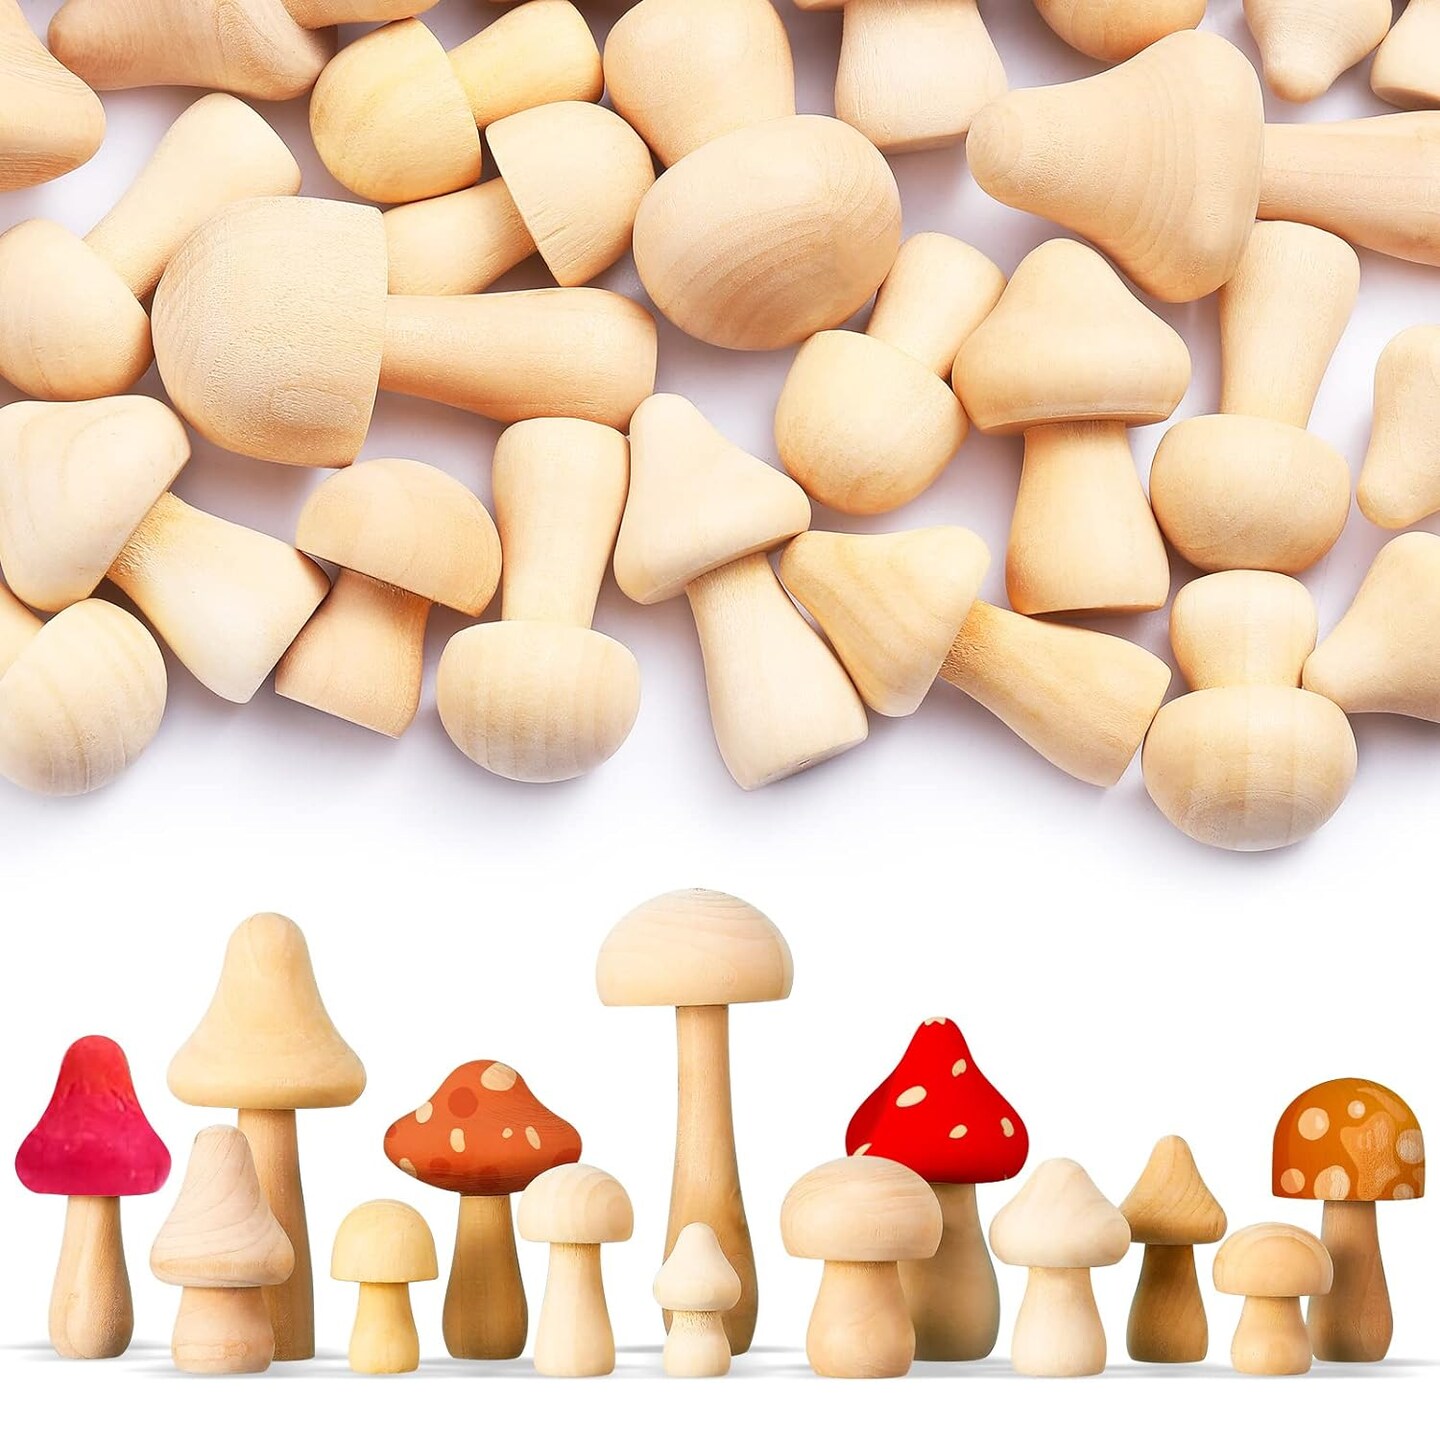 40 Pcs Unfinished Wooden Mushroom Natural Mini Wood Mushrooms Various Sizes Wood Mushroom Figures For Arts And Crafts, Diy Projects Ornaments Paint Color Home Desk Bookshelves Decoration